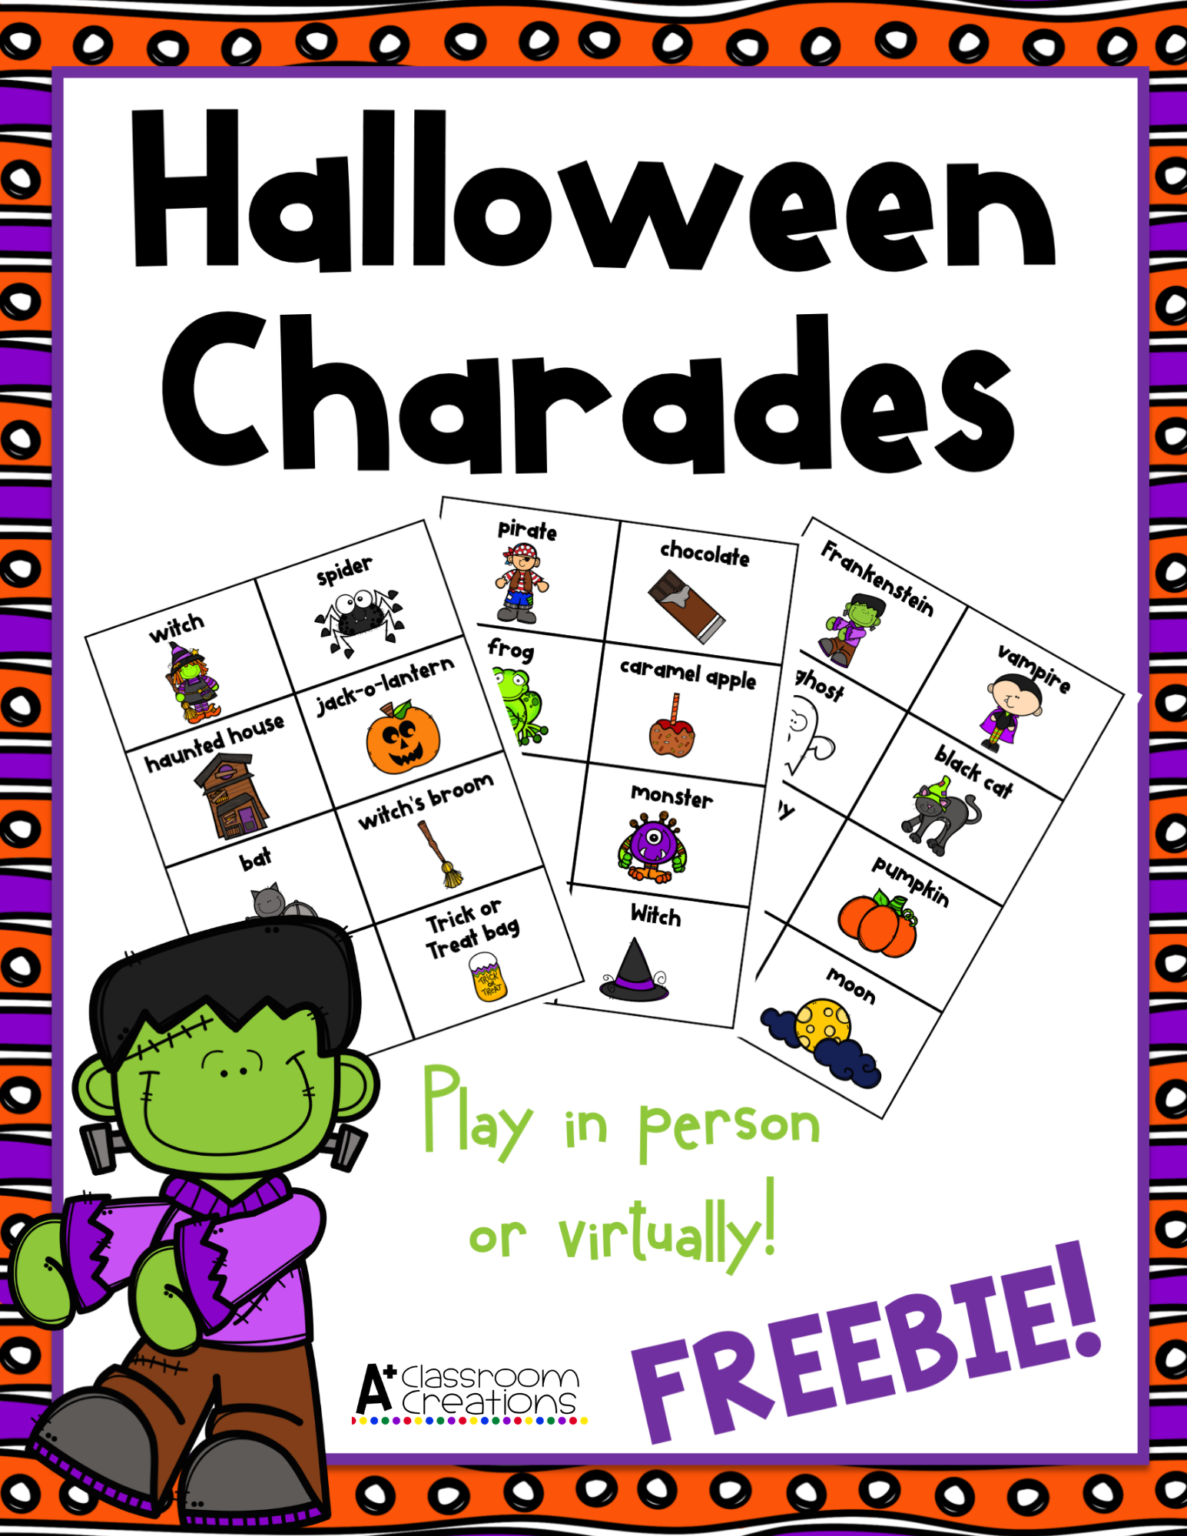 HALLOWEEN ACTIVITIES FOR VIRTUAL LEARNING A Plus Classroom Creations